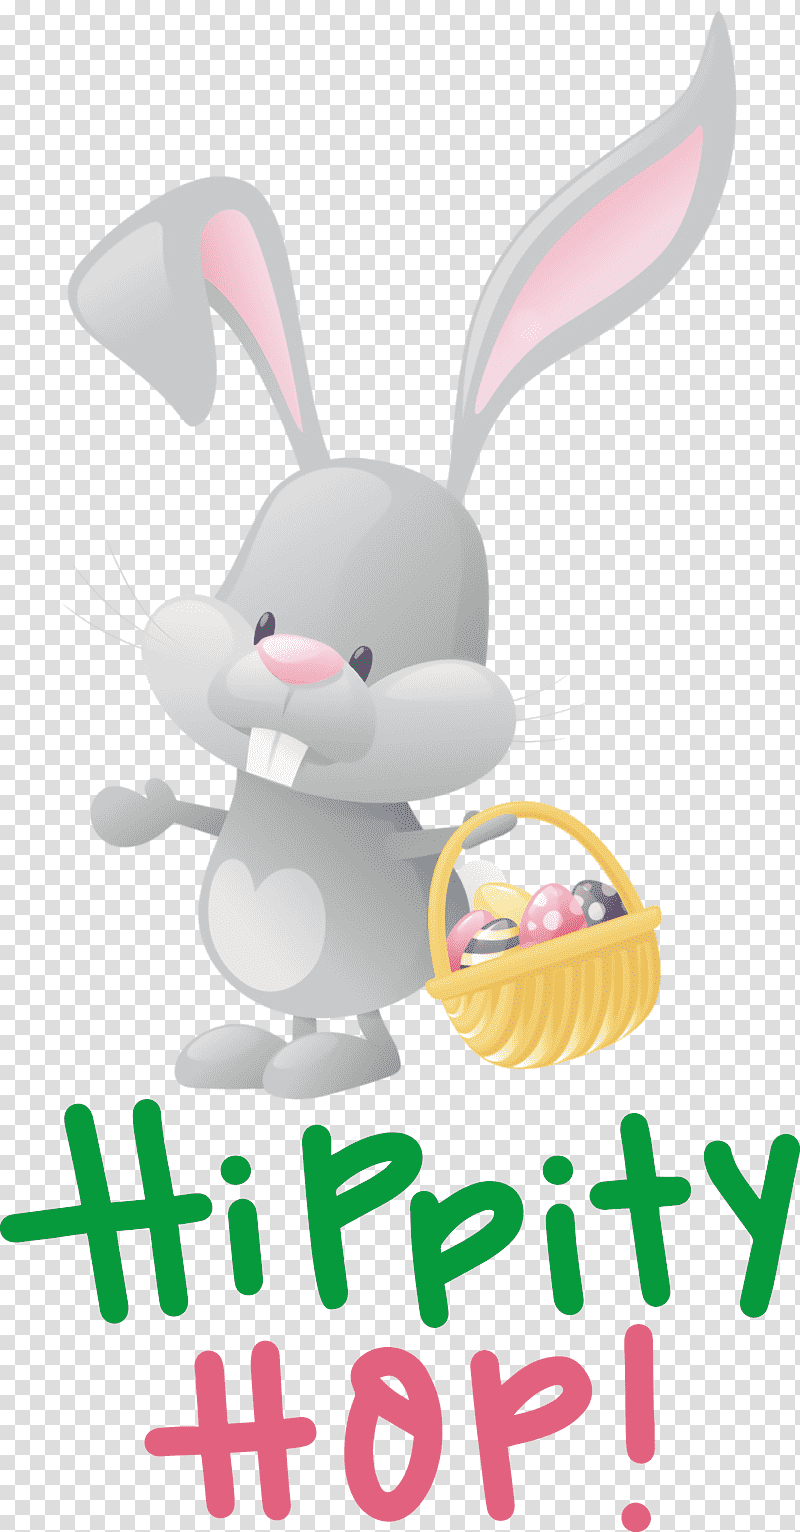 Happy Easter Hippity Hop, Easter Bunny, Cartoon, Meter, Biology, Science transparent background PNG clipart